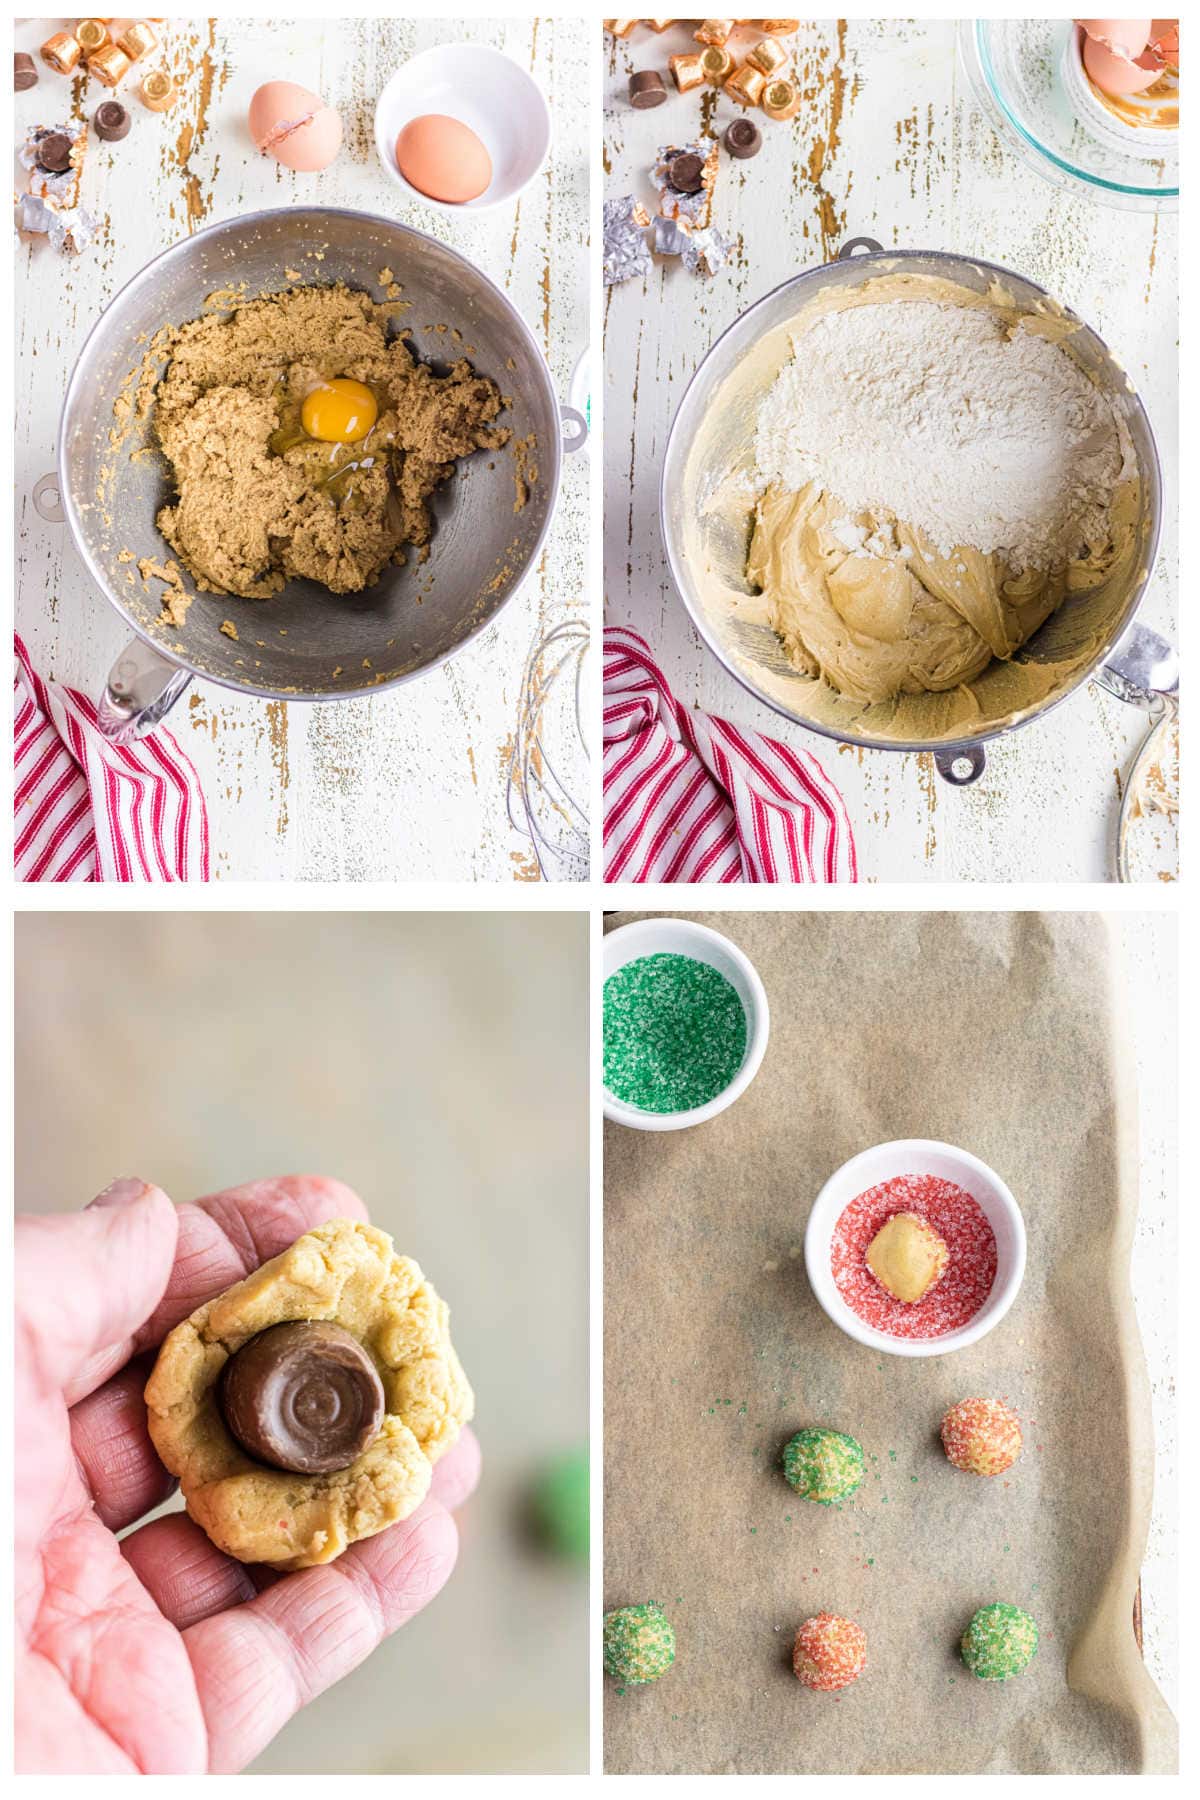 Step by step images showing how to make Rolo cookies.